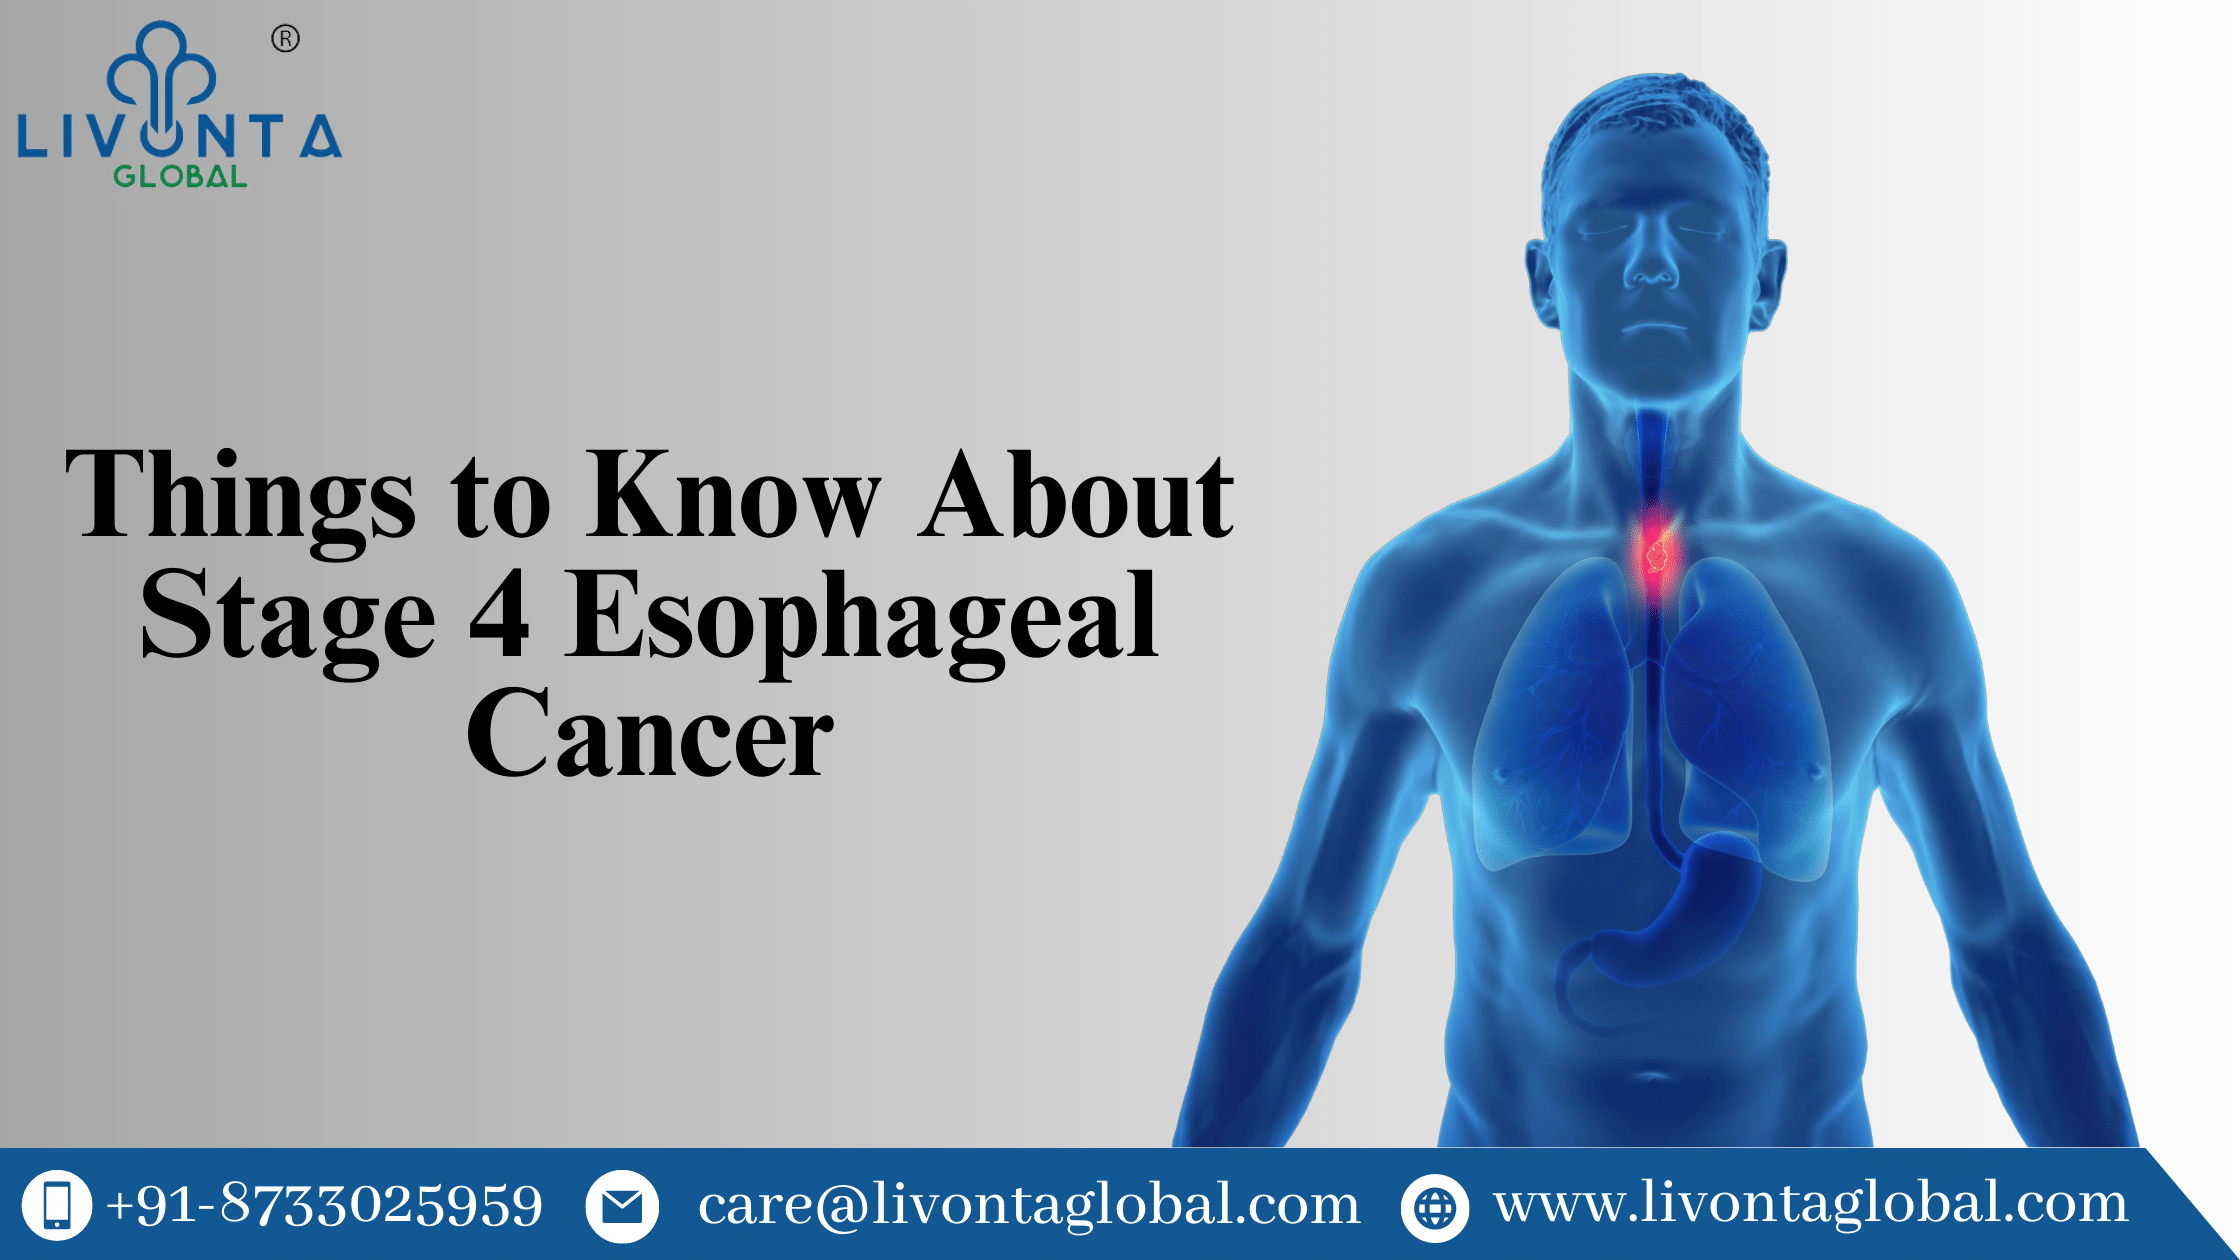 Things to Know About Stage 4 Esophageal Cancer